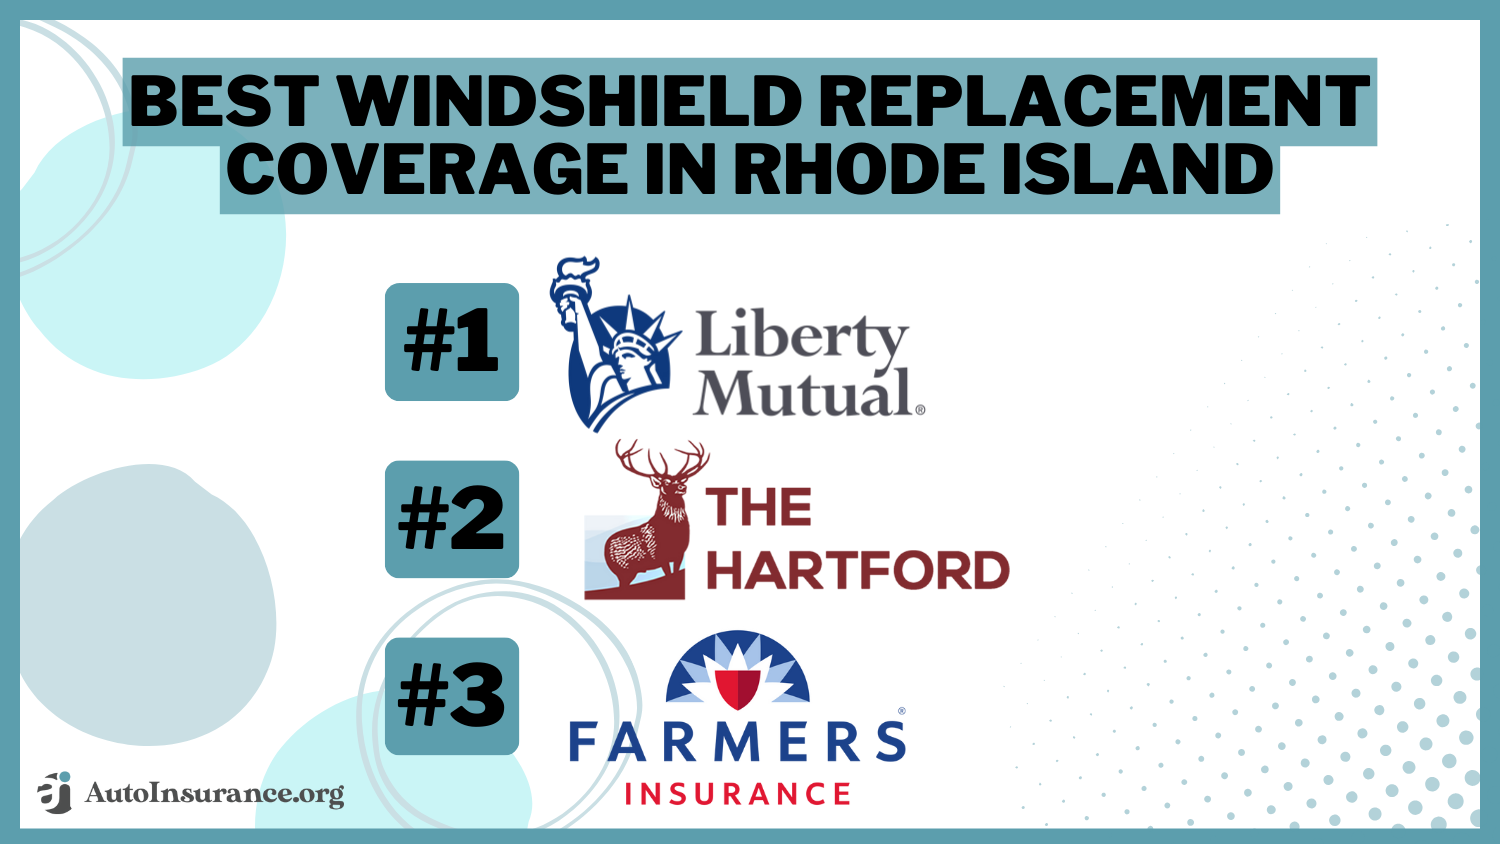 Best Windshield Replacement Coverage in Rhode Island: Liberty Mutual, The Hartford, and Farmers